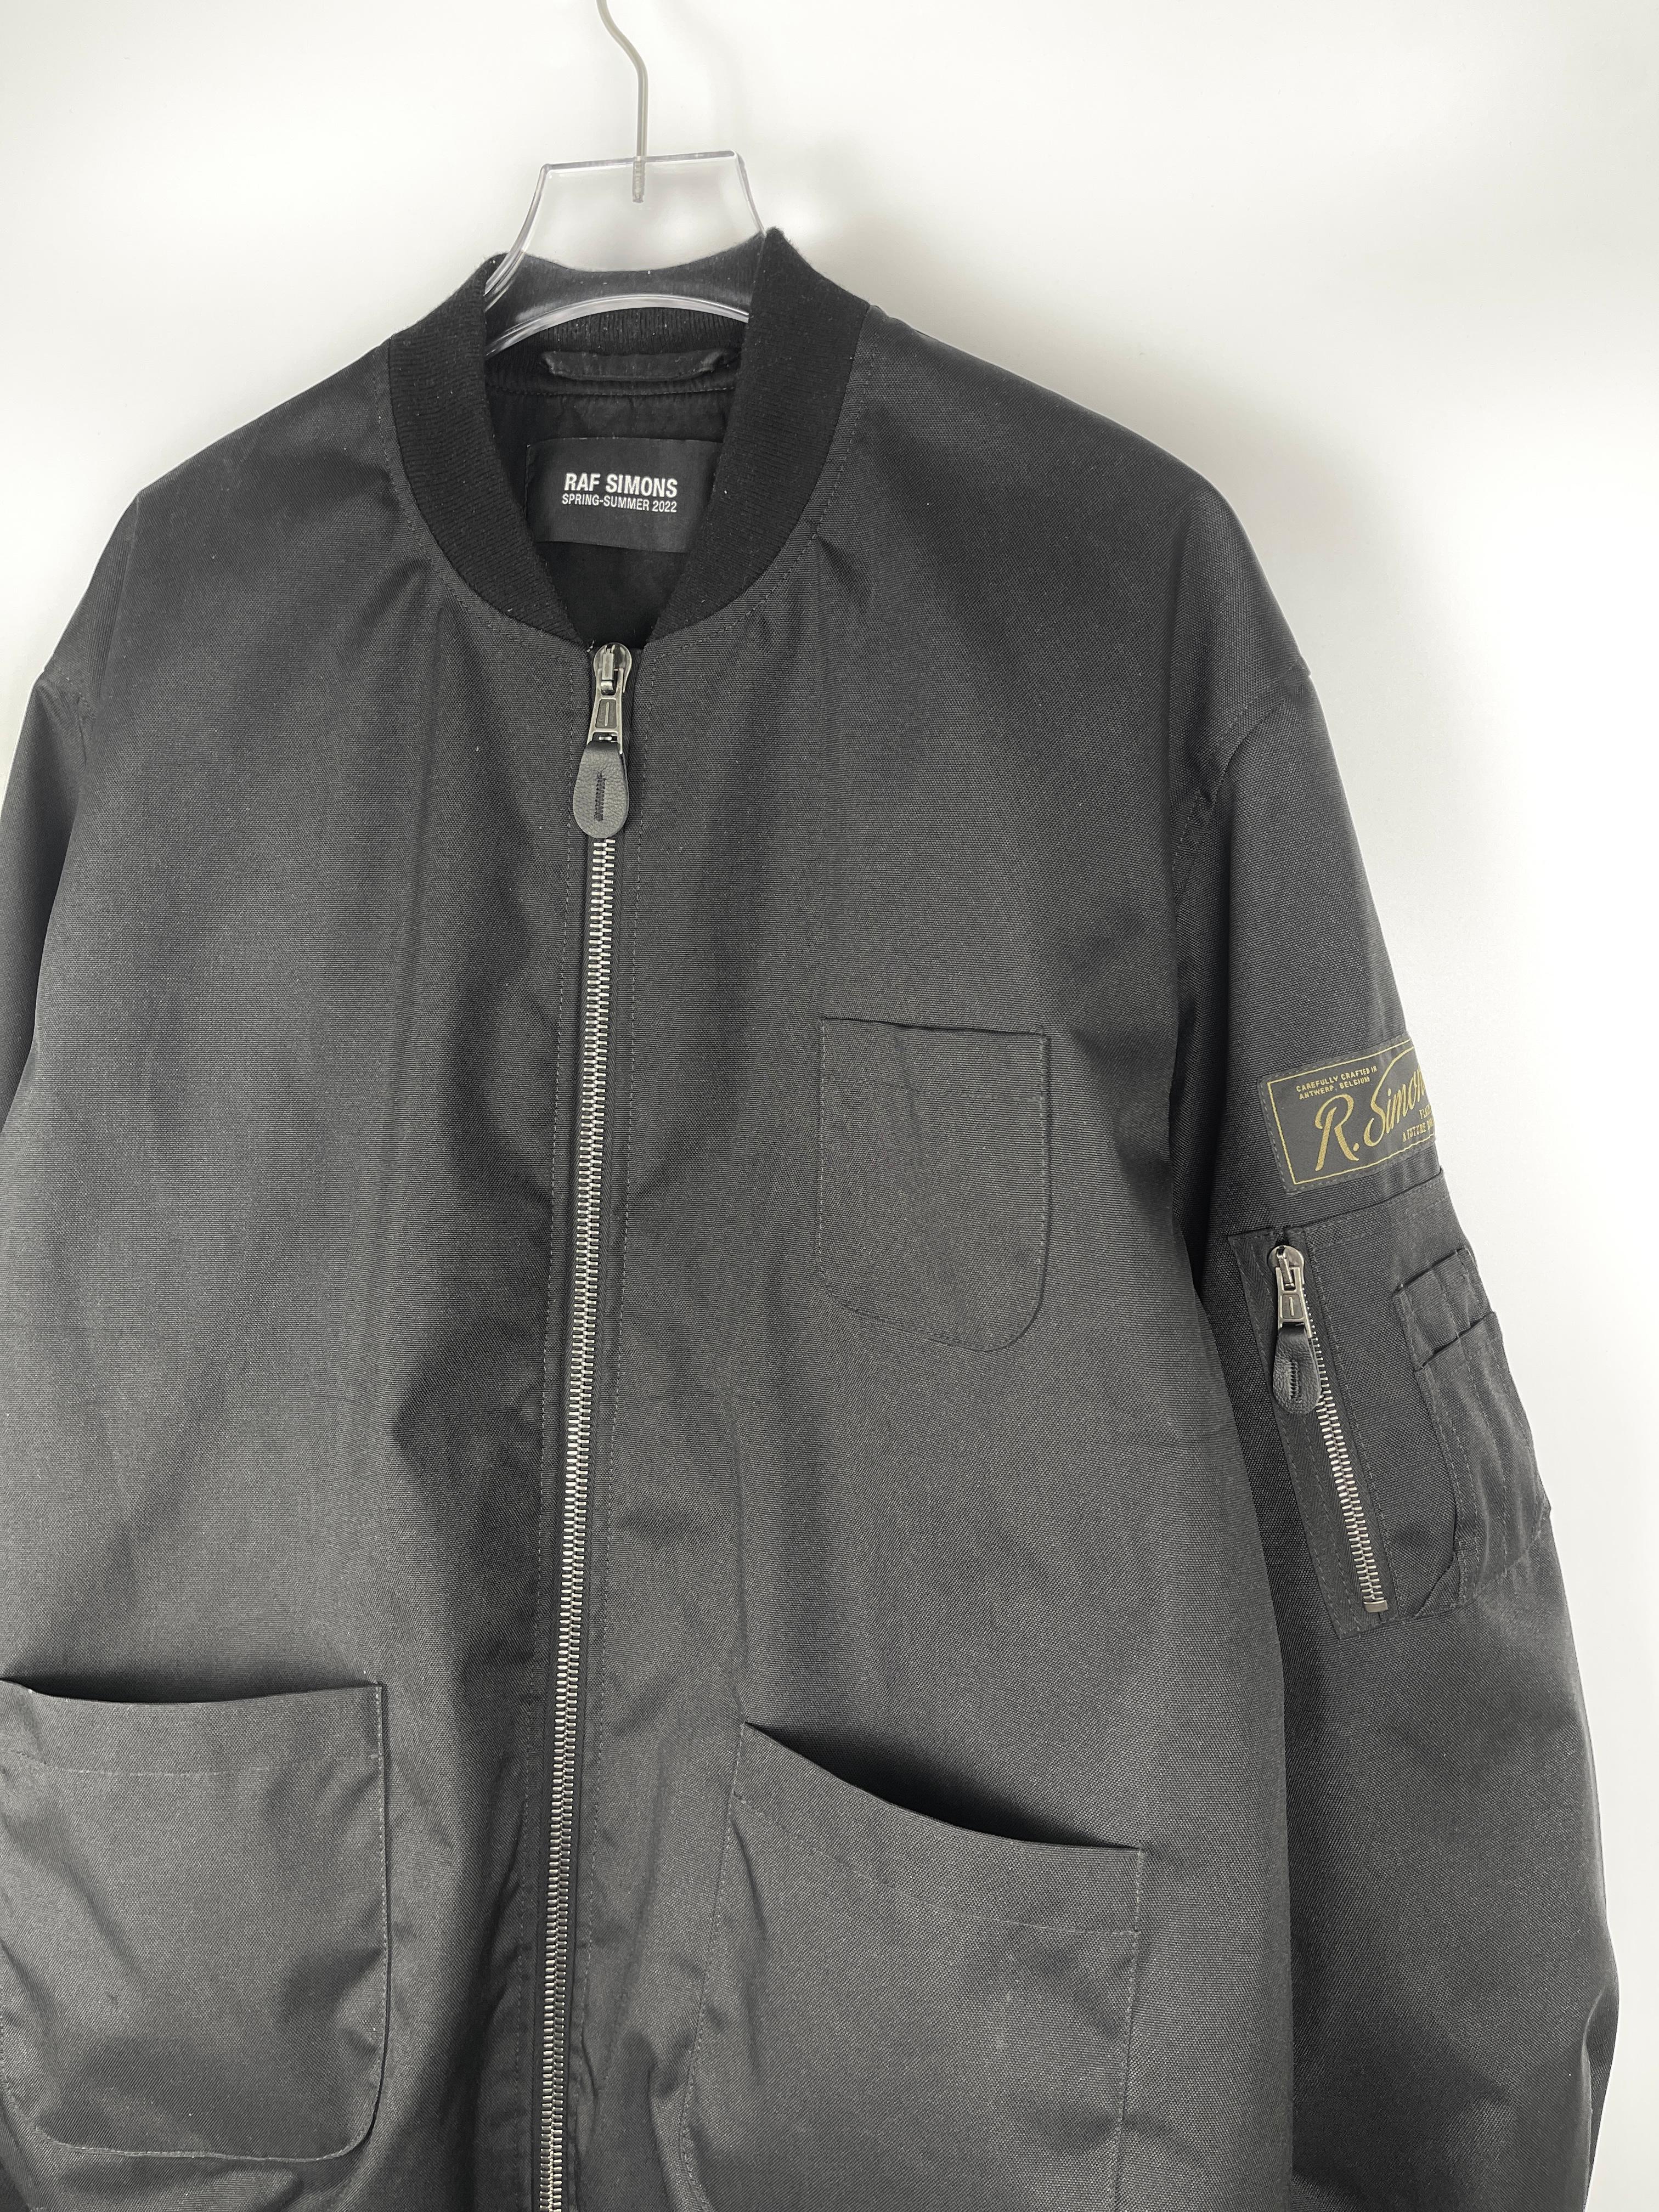 Raf Simons S/S2022 Uniform Bomber Jacket  In Excellent Condition For Sale In Tương Mai Ward, Hoang Mai District